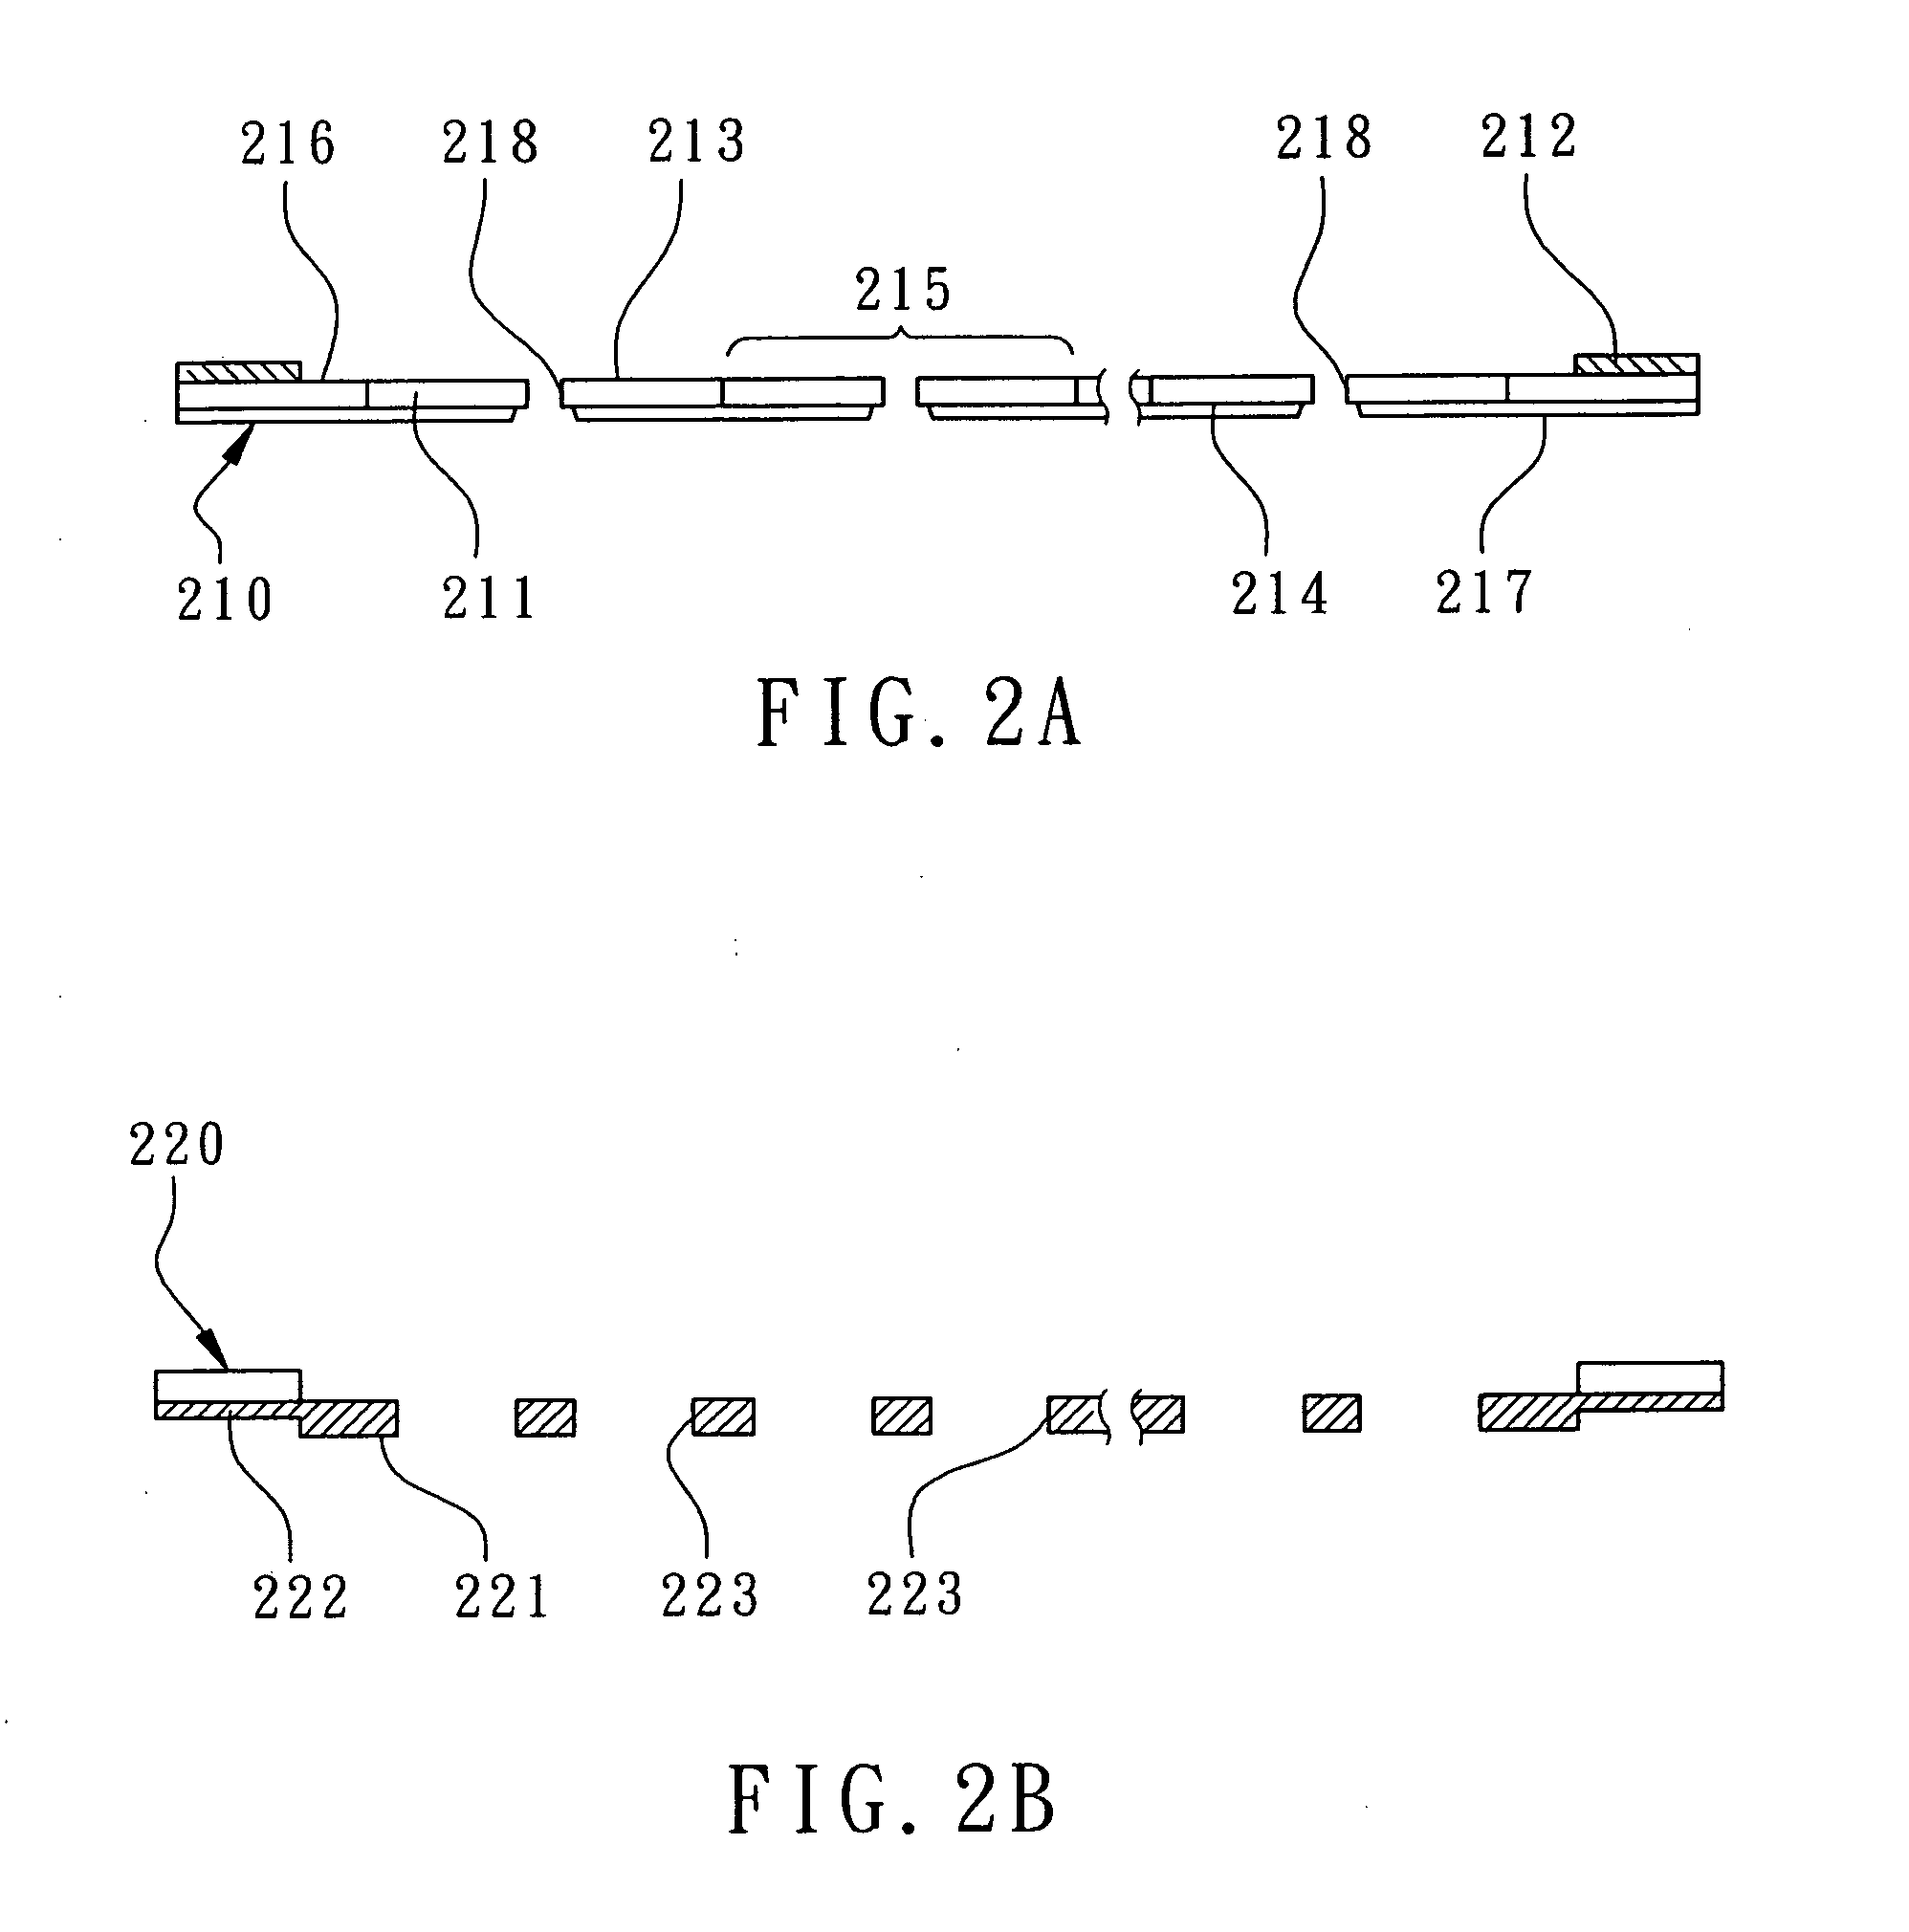 Method for forming a die-attach layer during semiconductor packaging processes